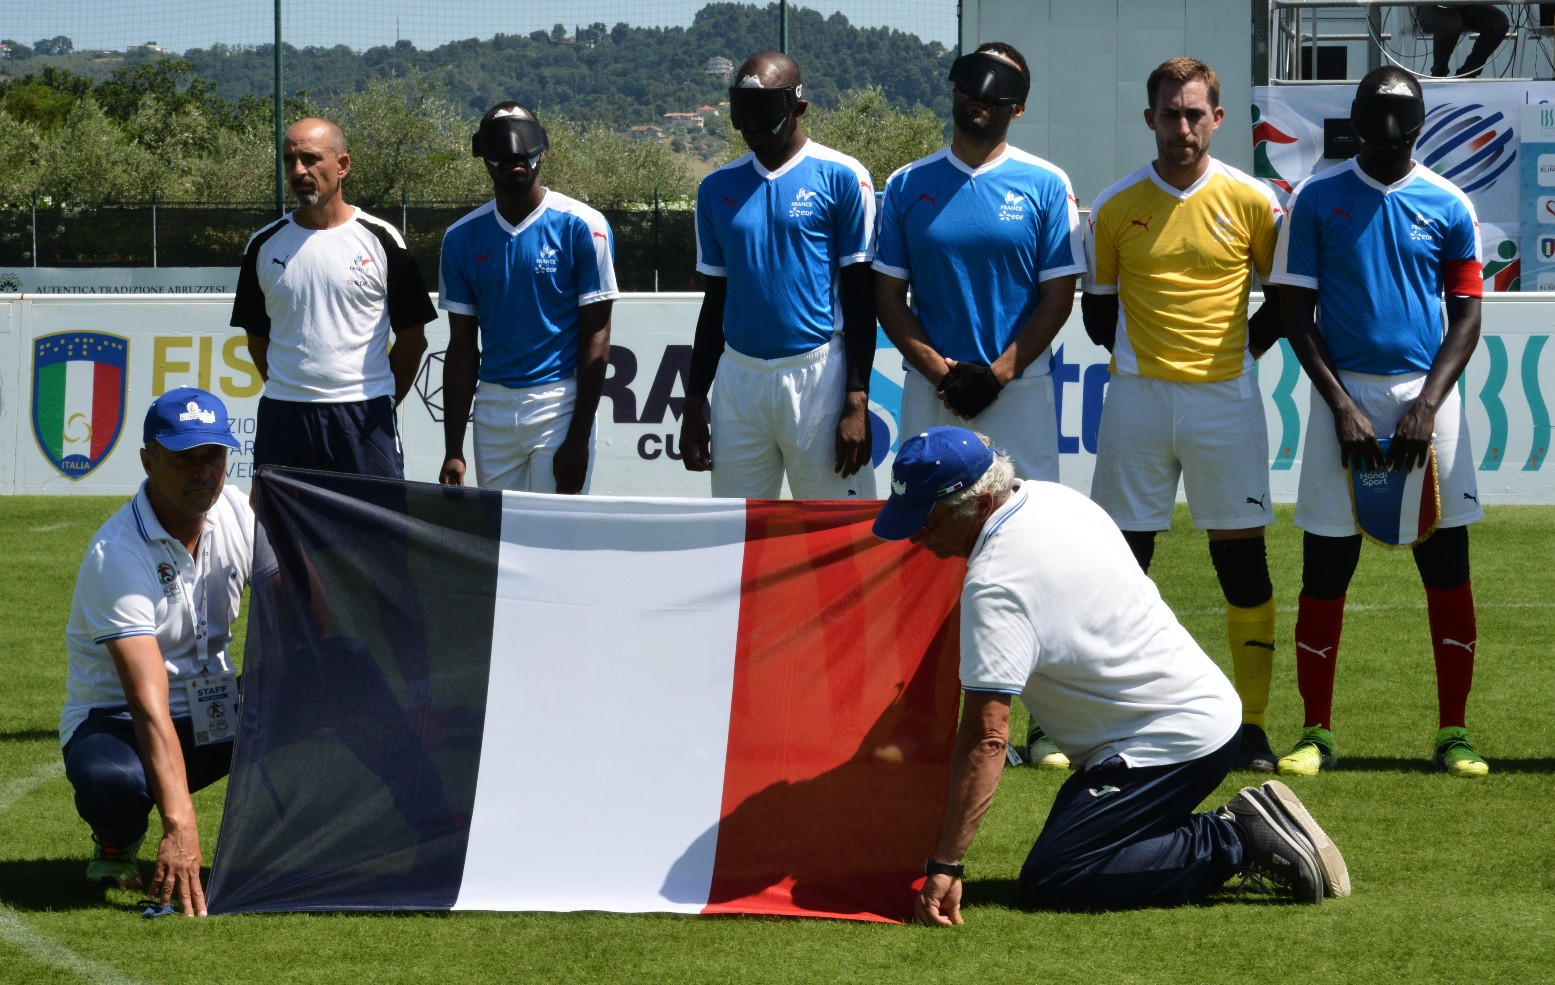 France victorious at Blind Football European Championship